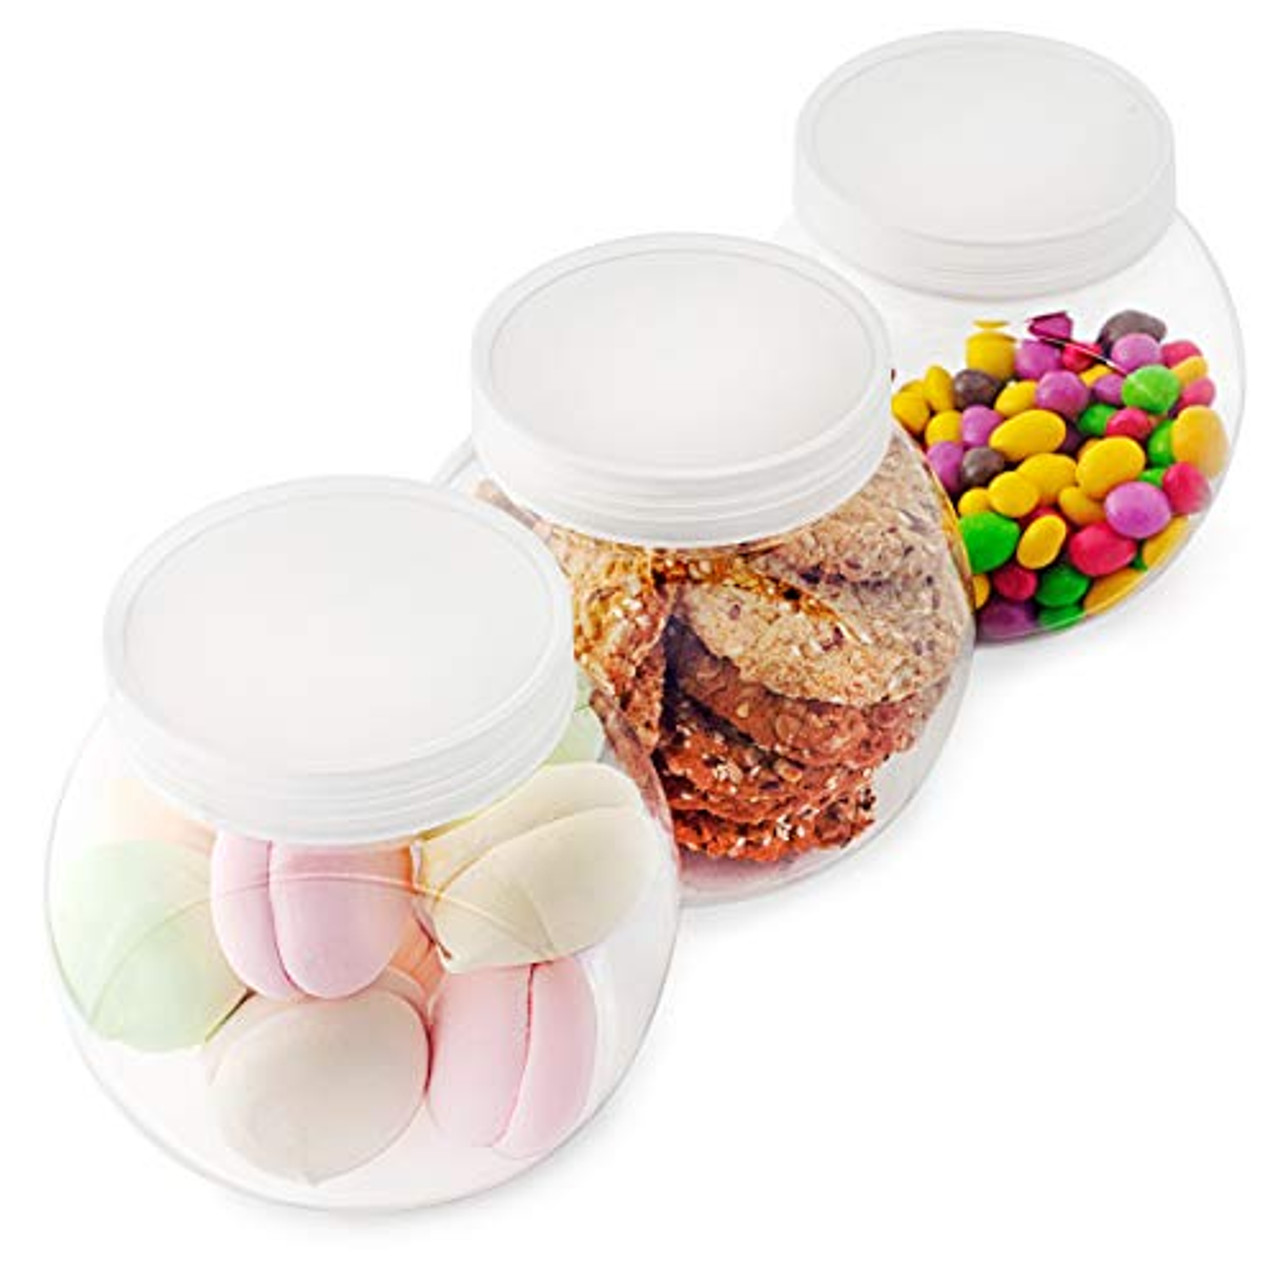 Candy Jar, Candy Jars with Lids, Cookie Jar for Kitchen Counter